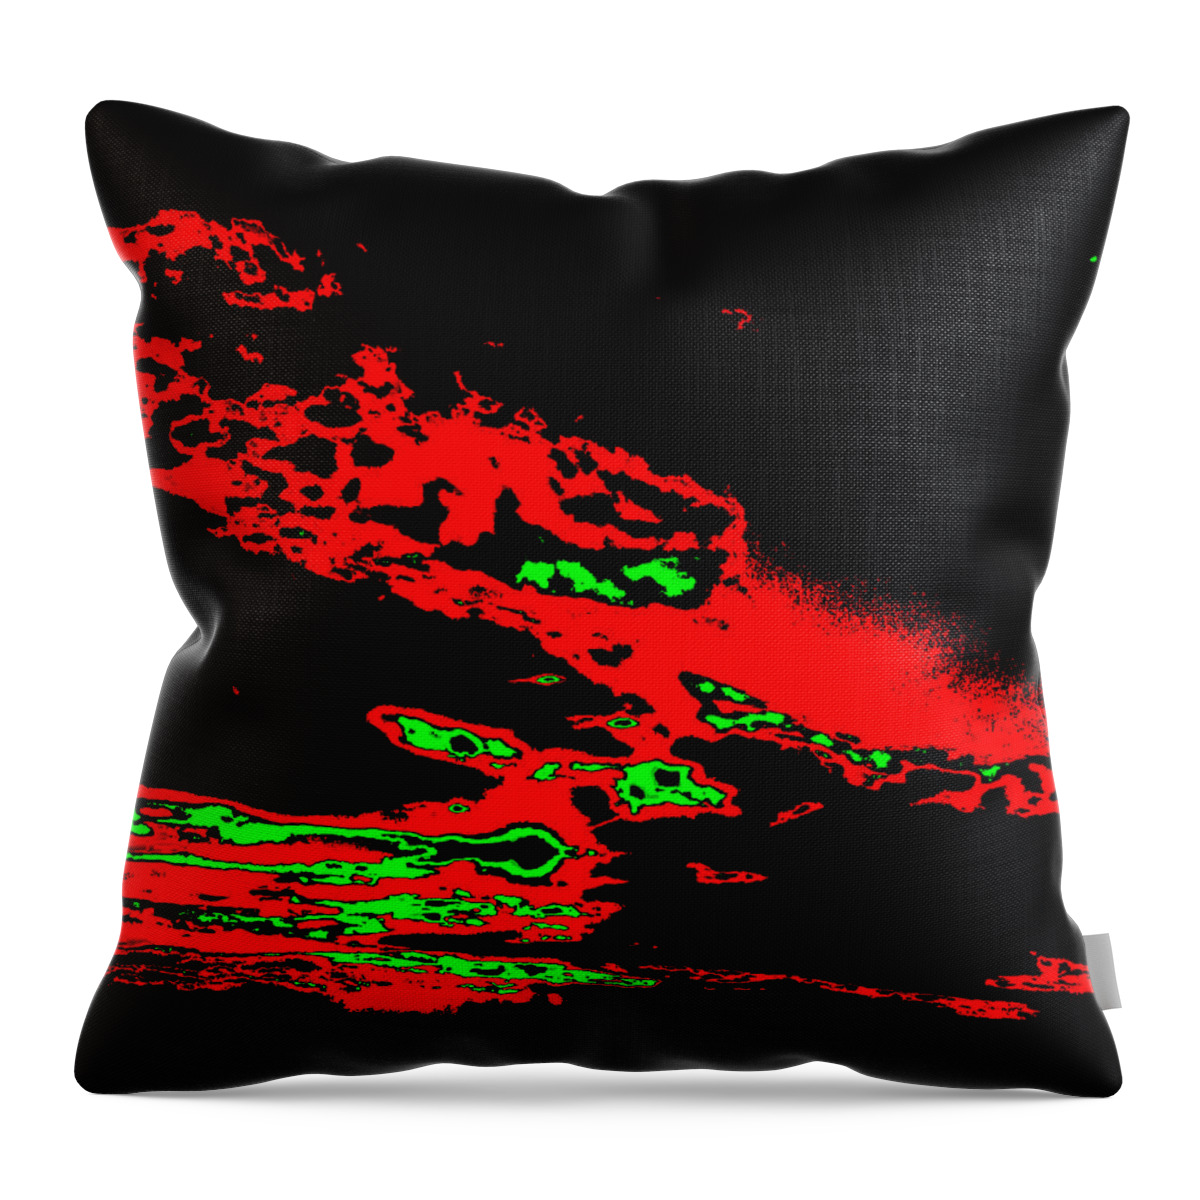  Throw Pillow featuring the photograph Chastity 4 by Trevor A Smith